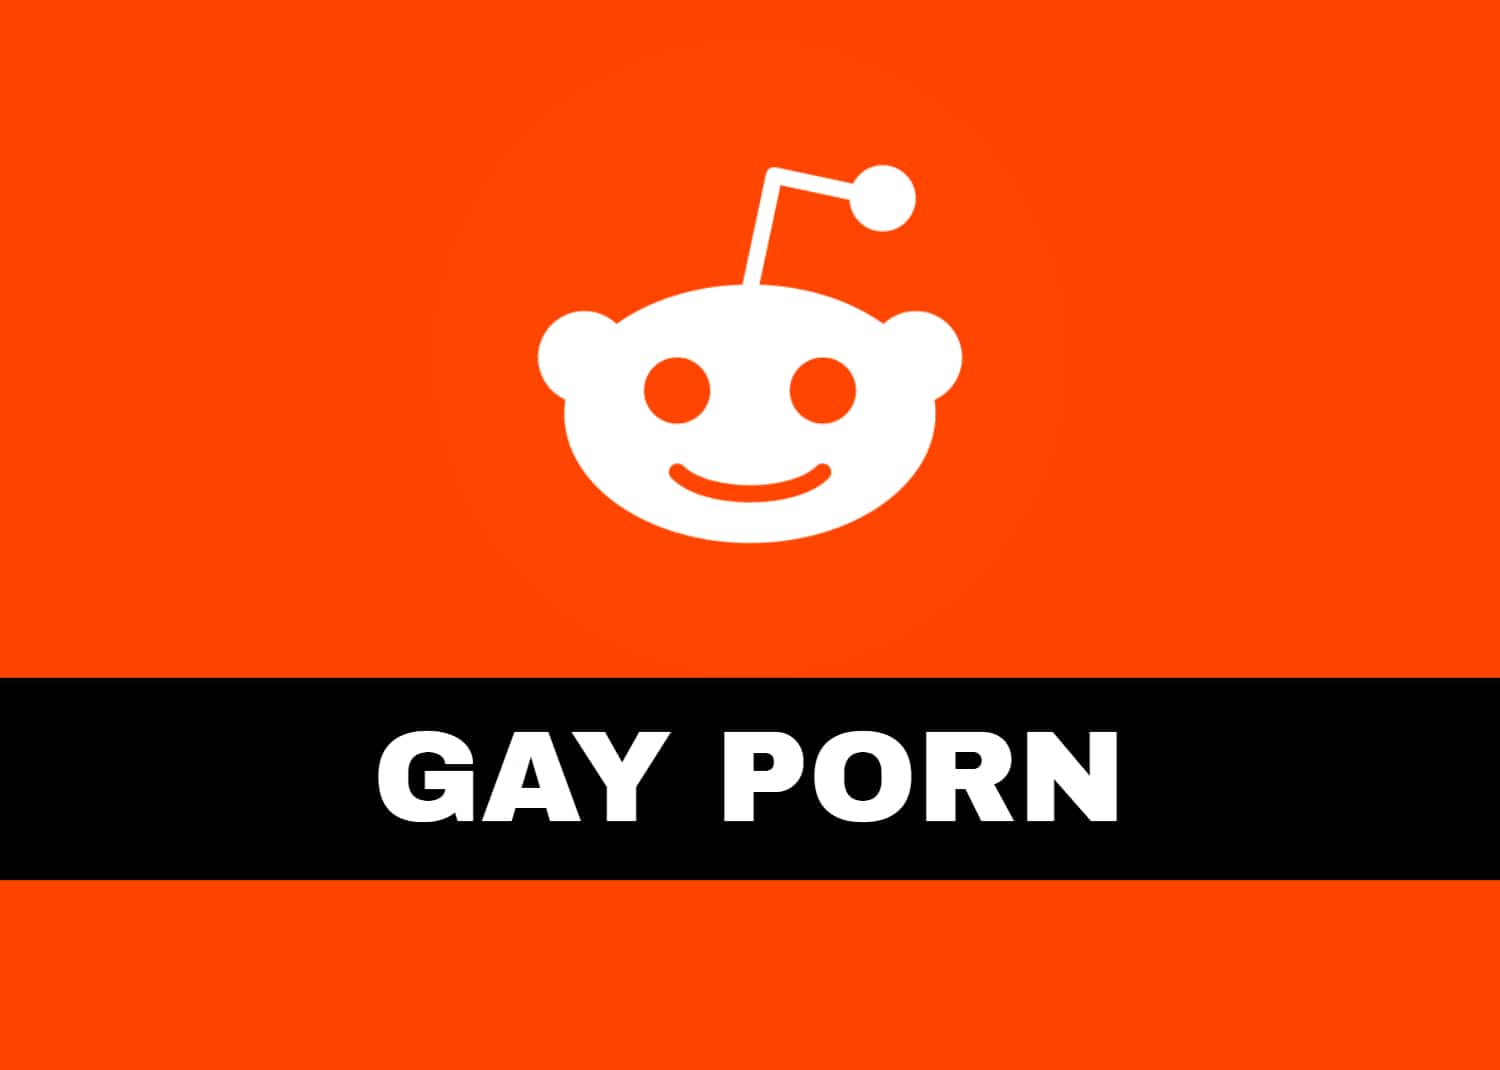 Gay Porn Texts - Gay Porn: The largest group for gay porn on Reddit